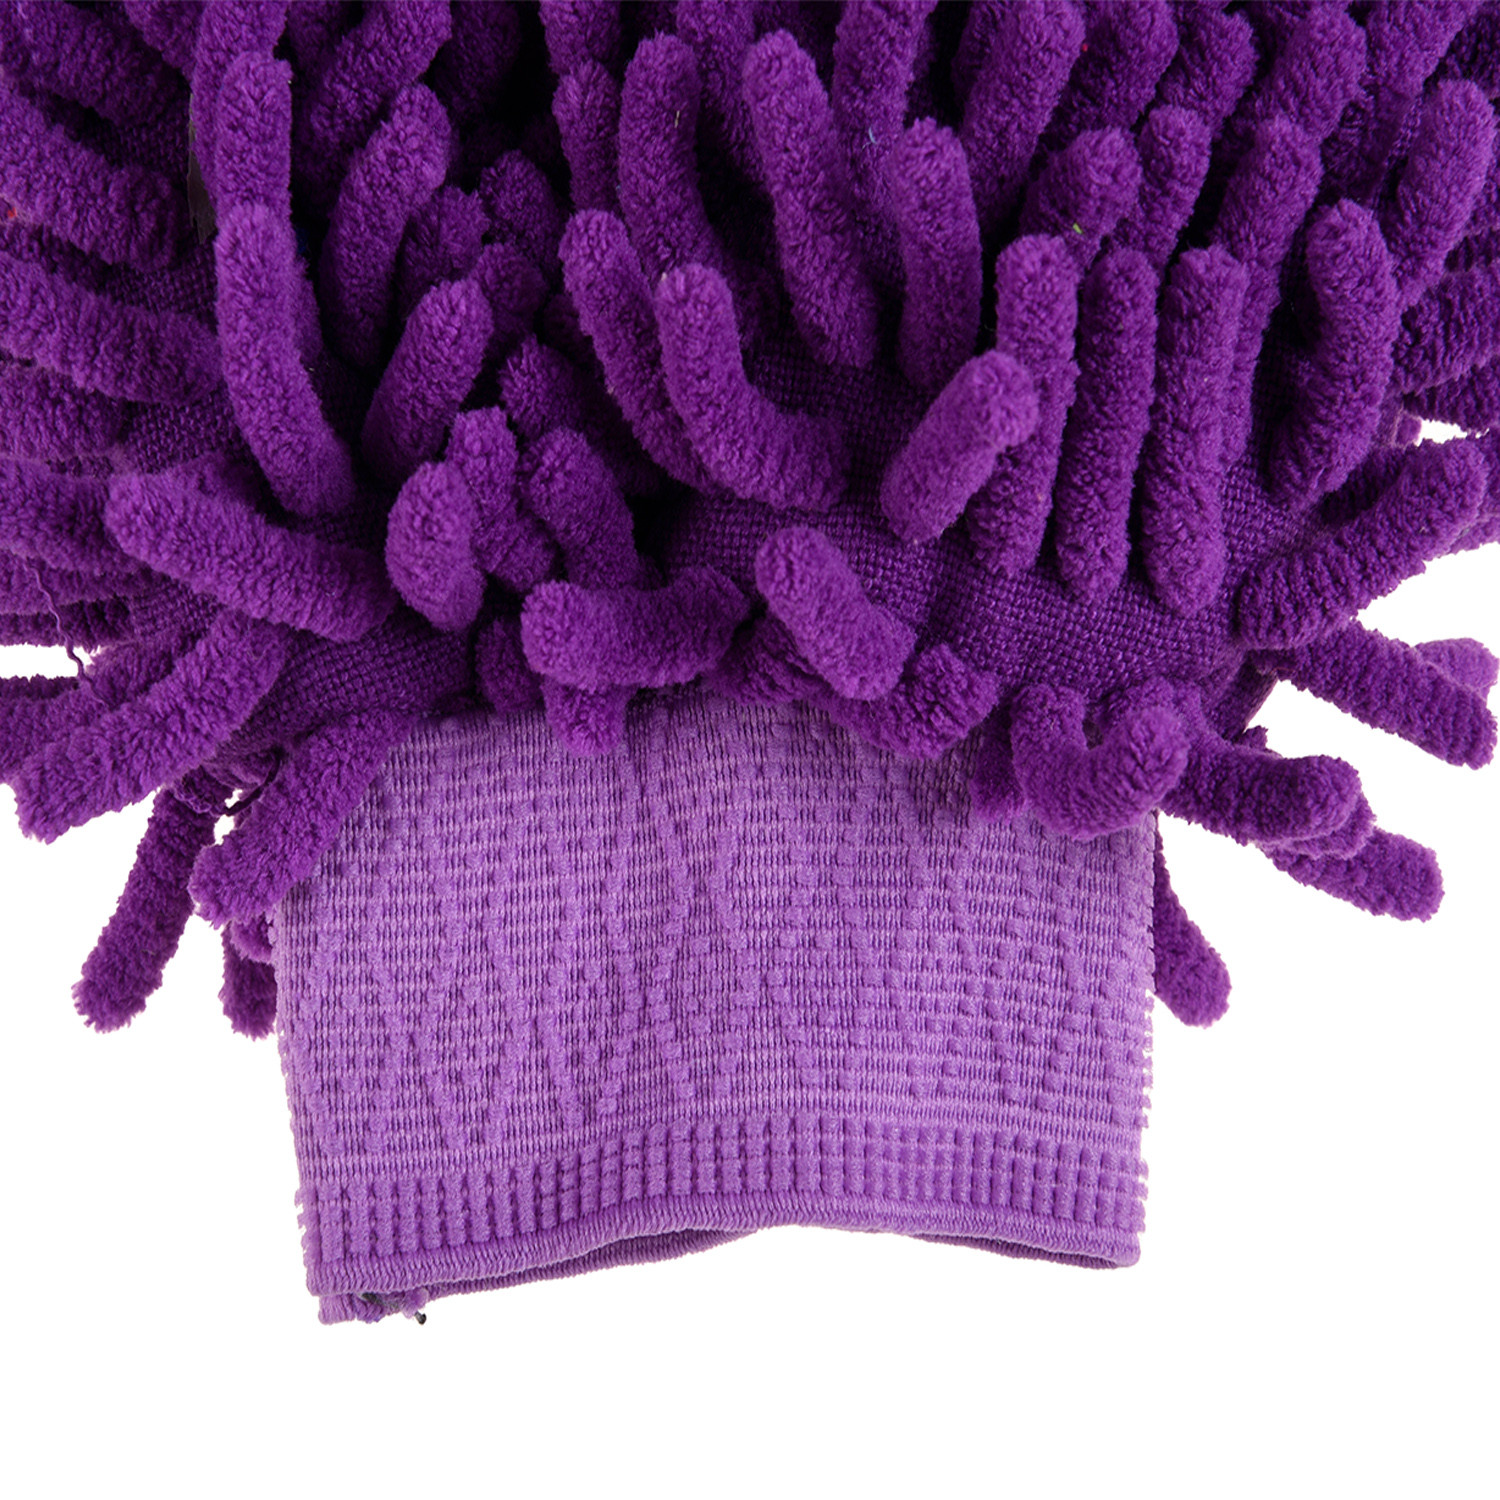 Kuber Industries Chenille Mitts|Microfiber Cleaning Gloves|Inside Waterproof Cloth Gloves|100 Gram Weighted Hand Duster|Chenille Gloves For Car|Glass|Pack of 2 (Purple & Green)